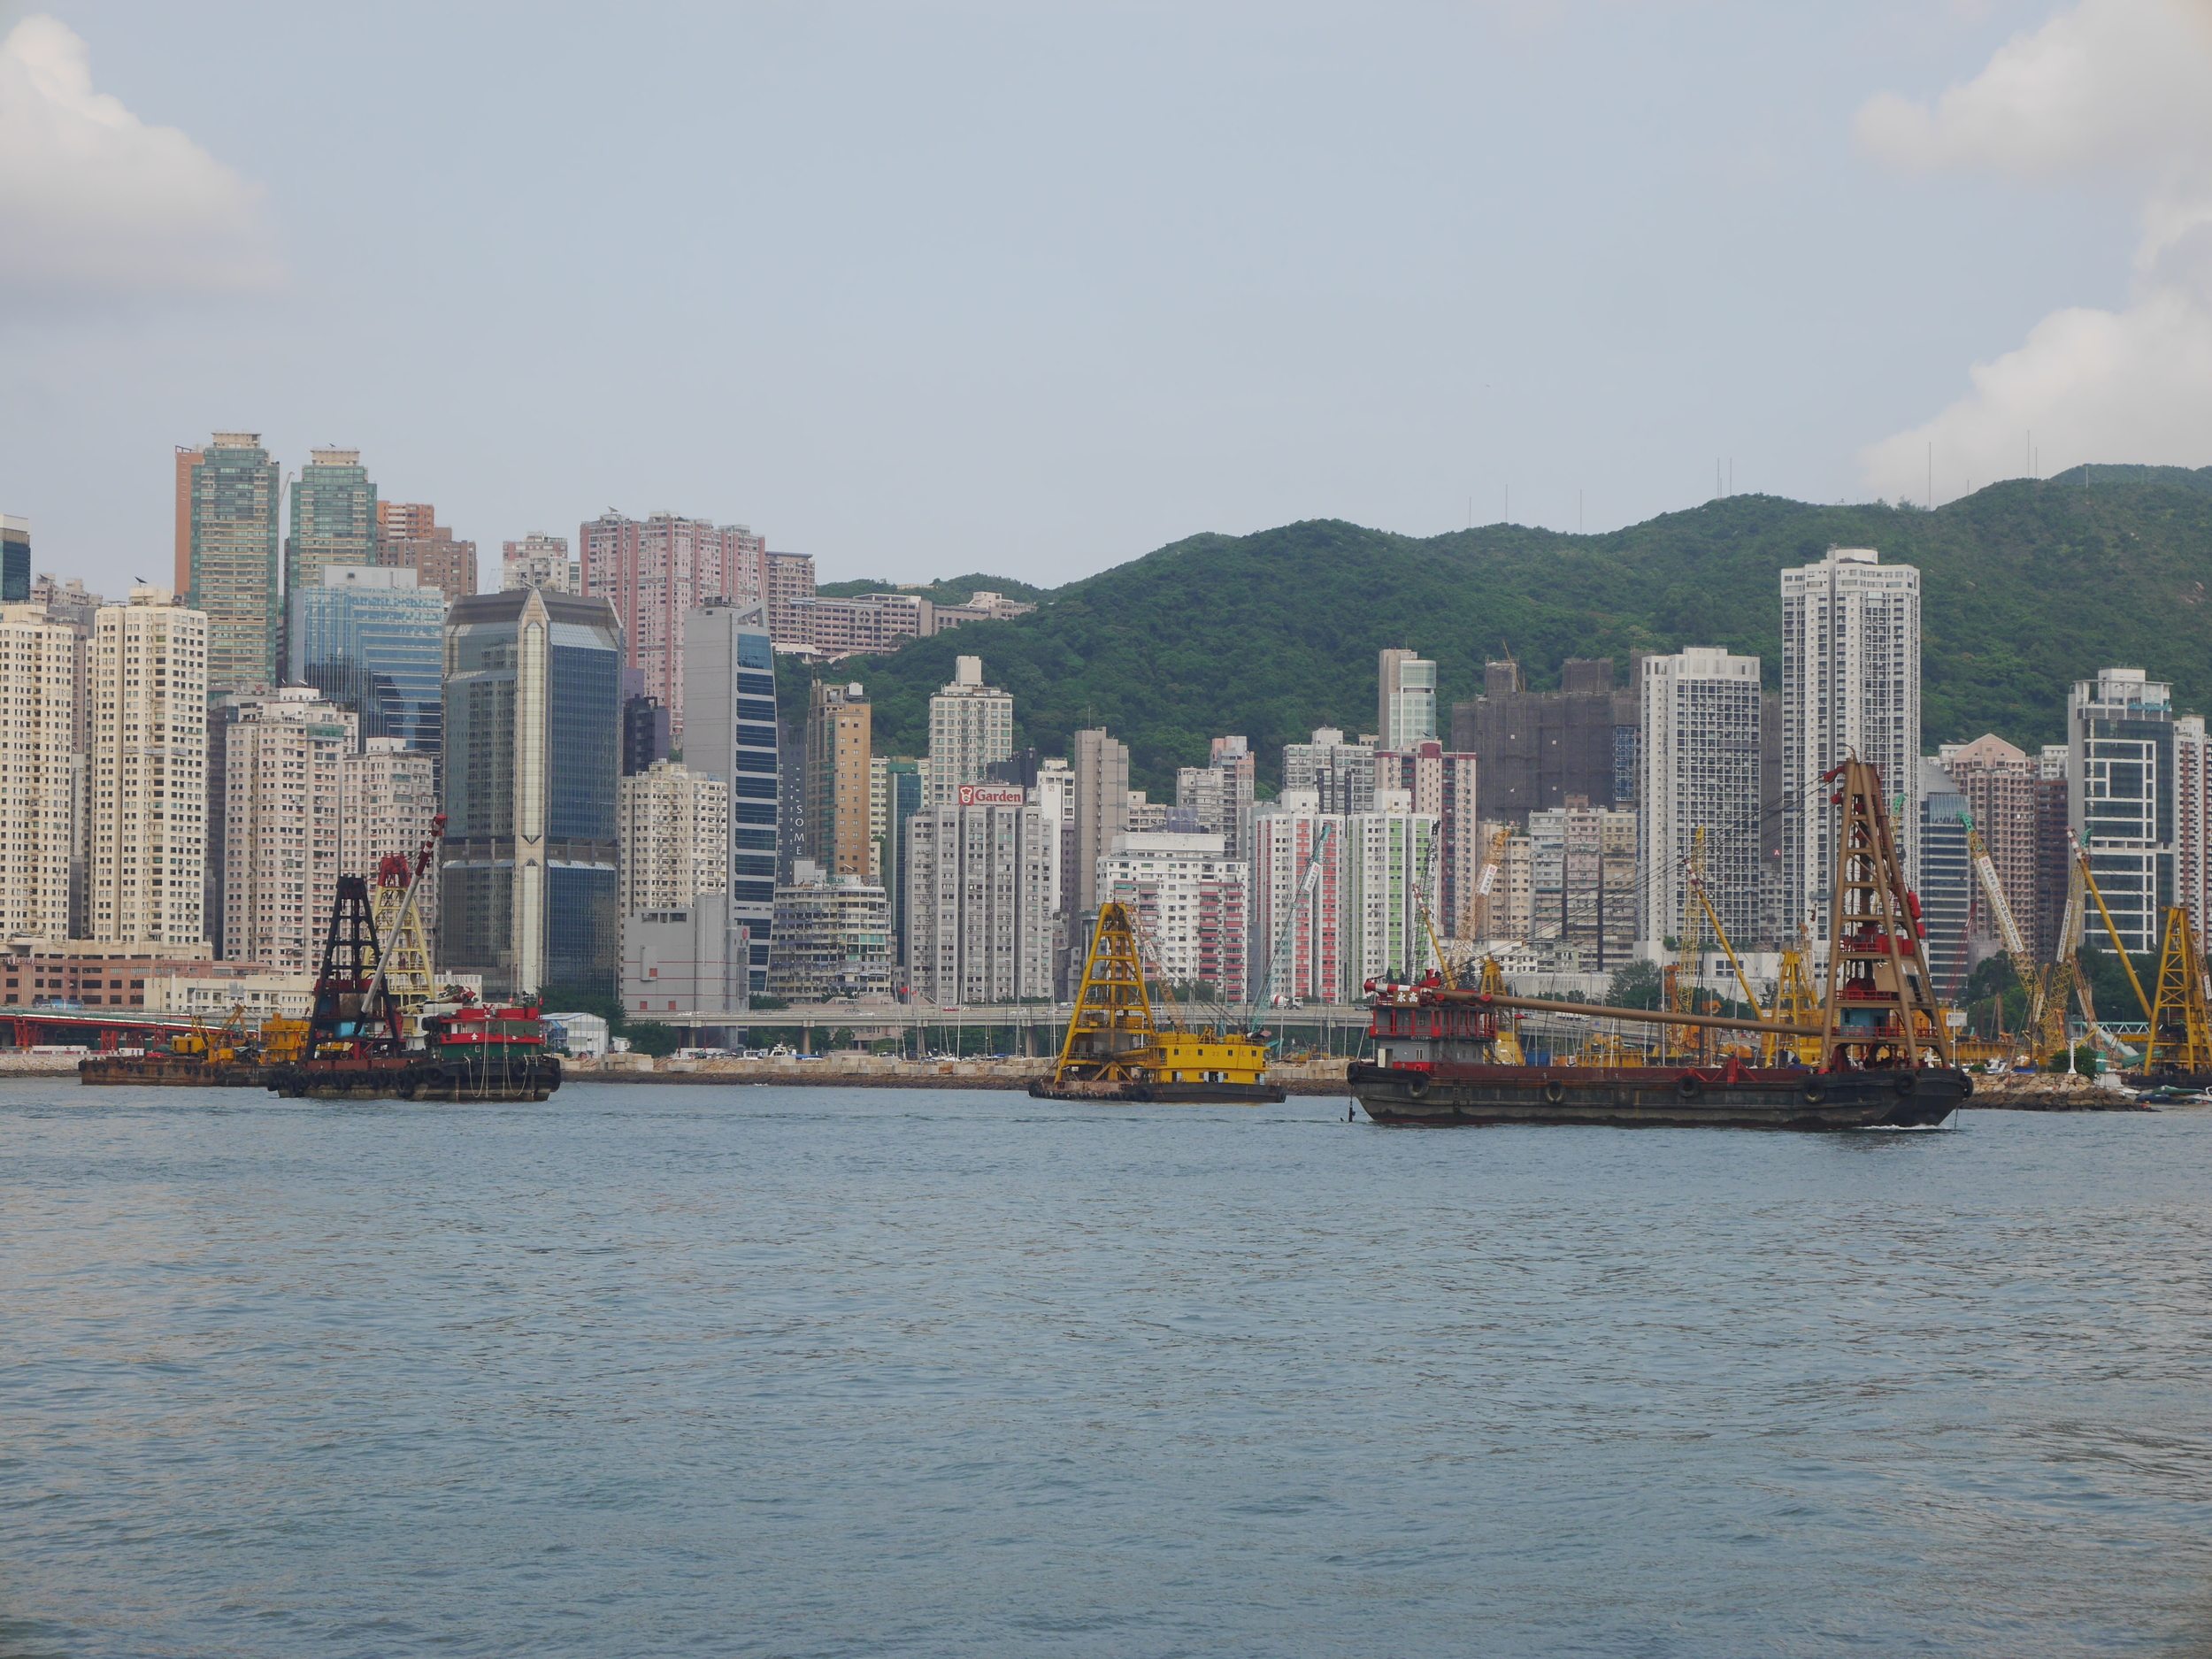  A ton of Hong Kong is built on "reclaimed" land. I think they're expanding the city here. 